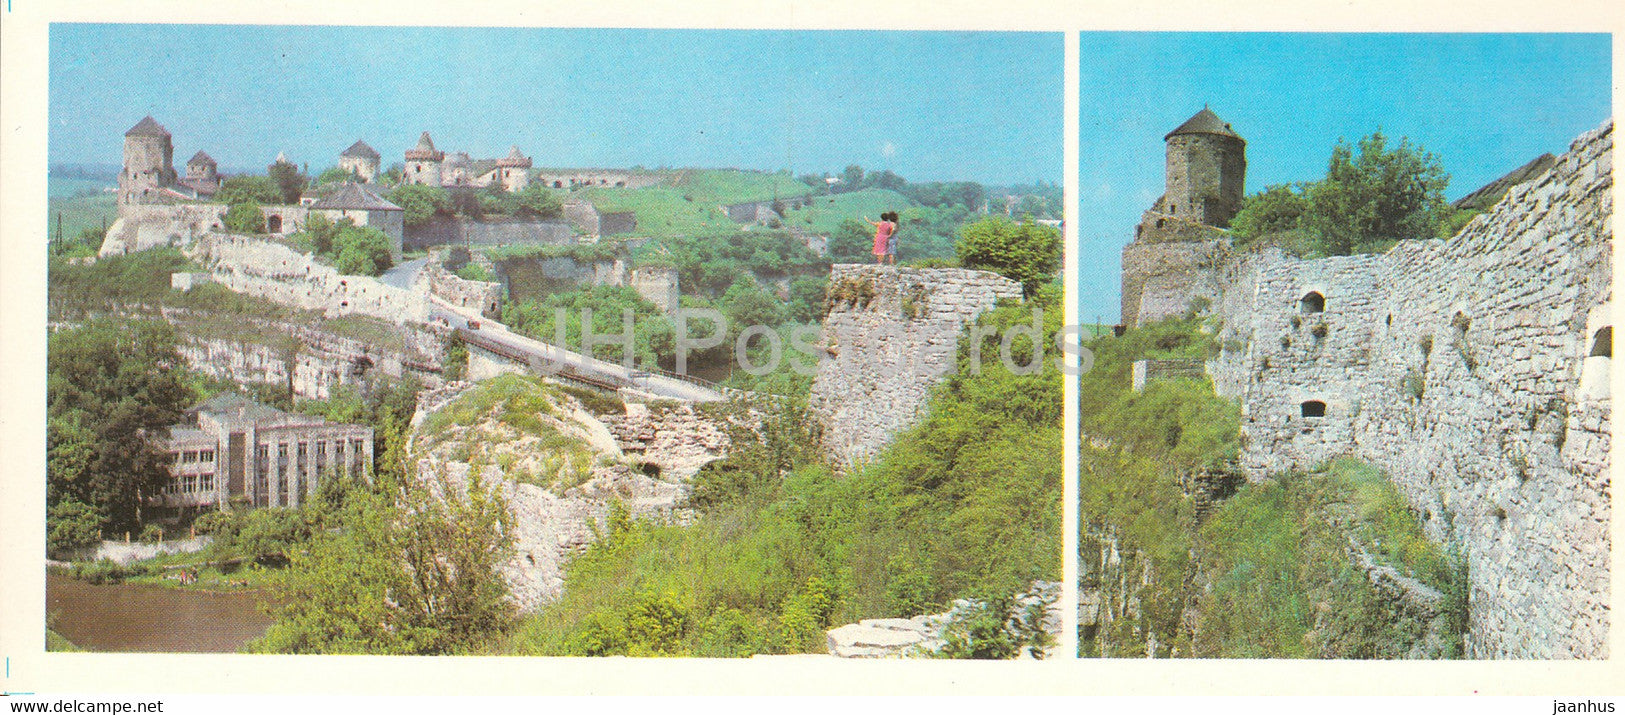 Kamianets Podilskyi - Khmelnytskyi Region - View at Old Fortress from the East - Walls - 1984 - Ukraine USSR - unused - JH Postcards